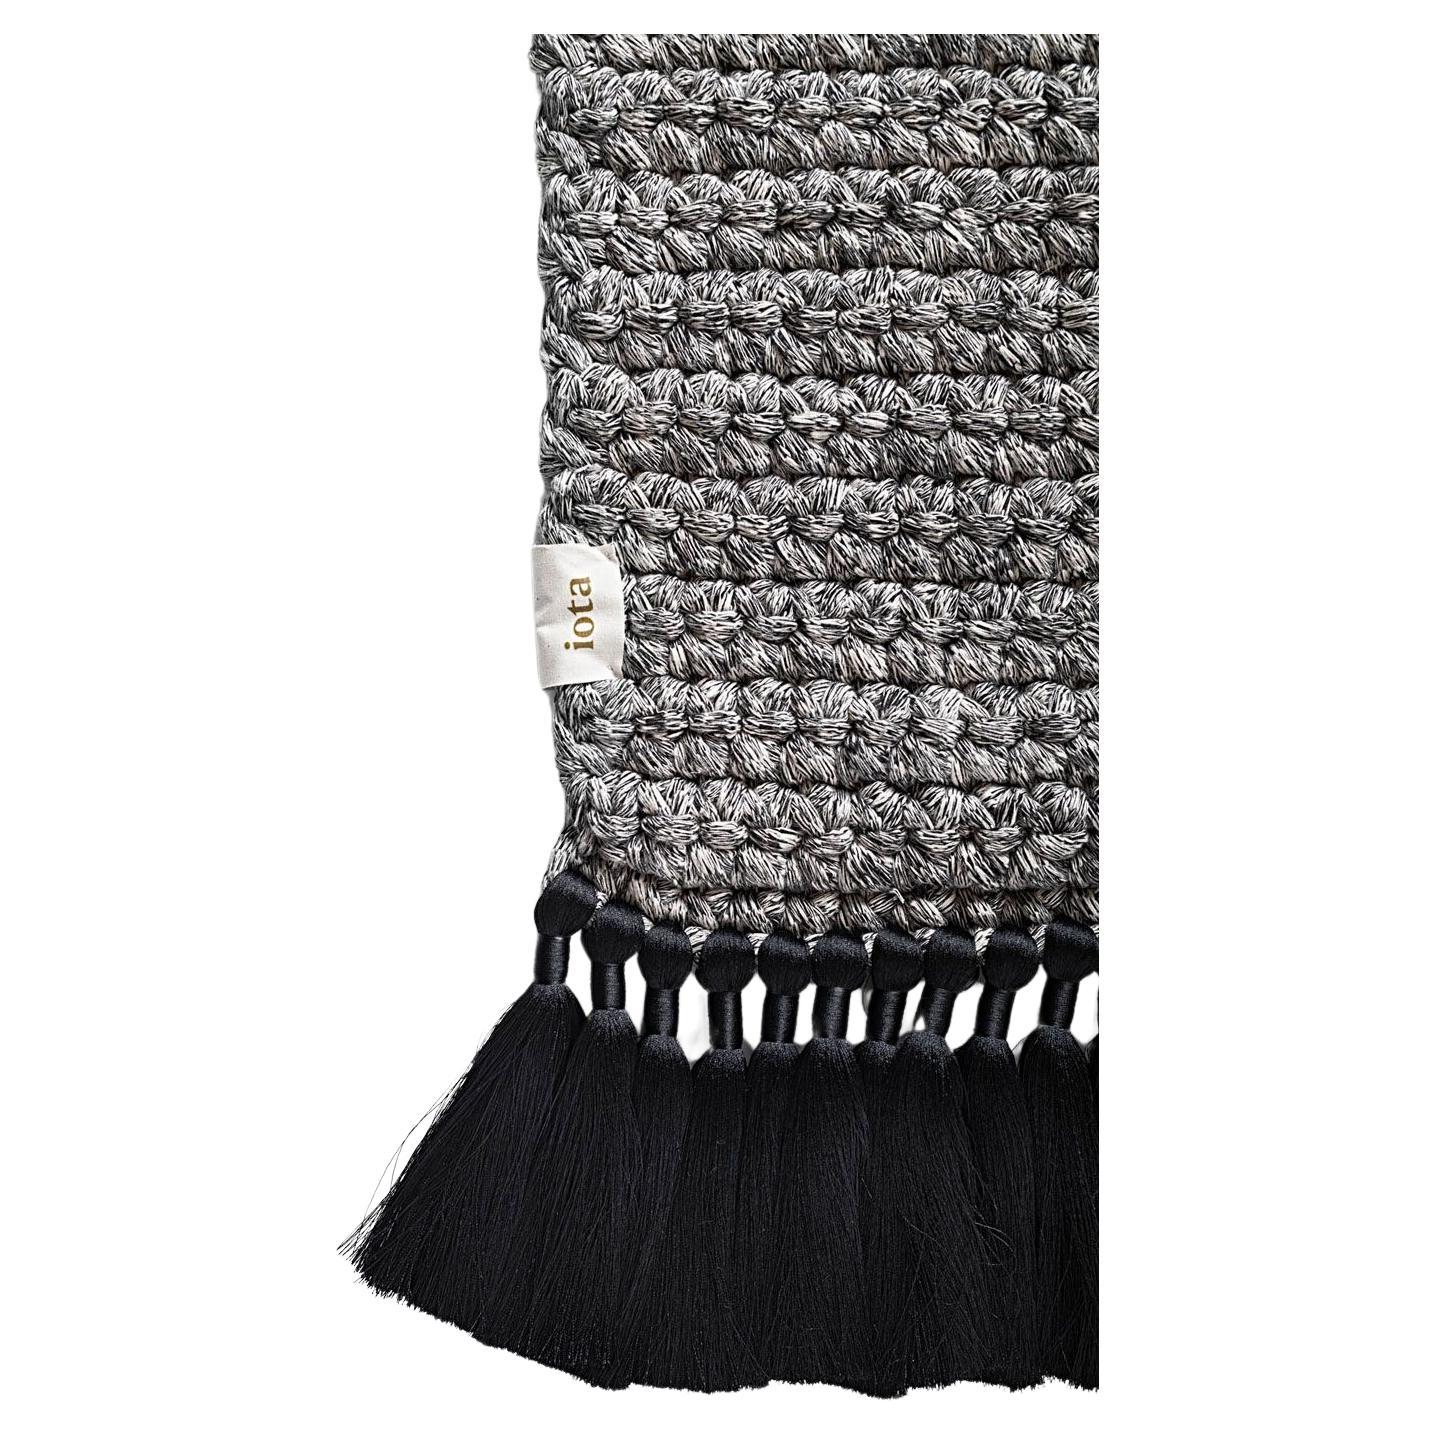 Handmade Crochet XL Thick Rug in Grey Black White Made of Cotton & Polyester For Sale